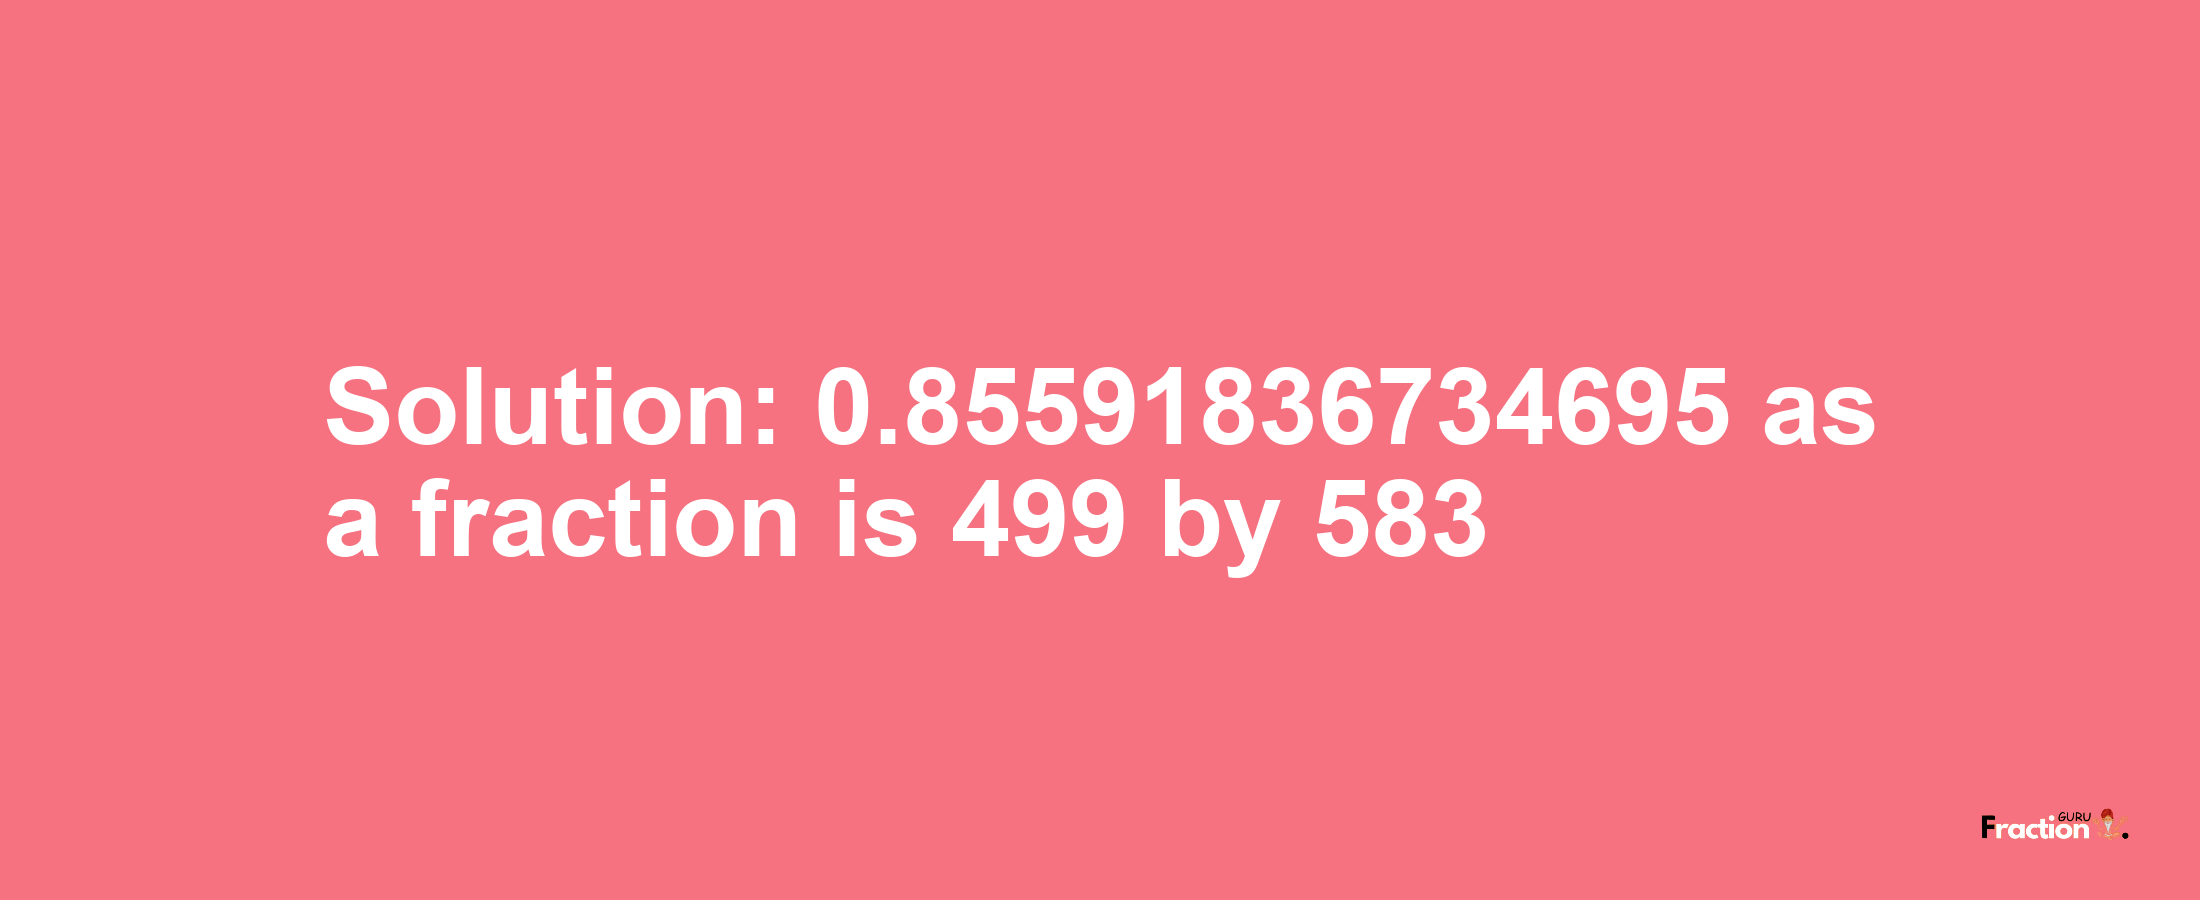 Solution:0.85591836734695 as a fraction is 499/583